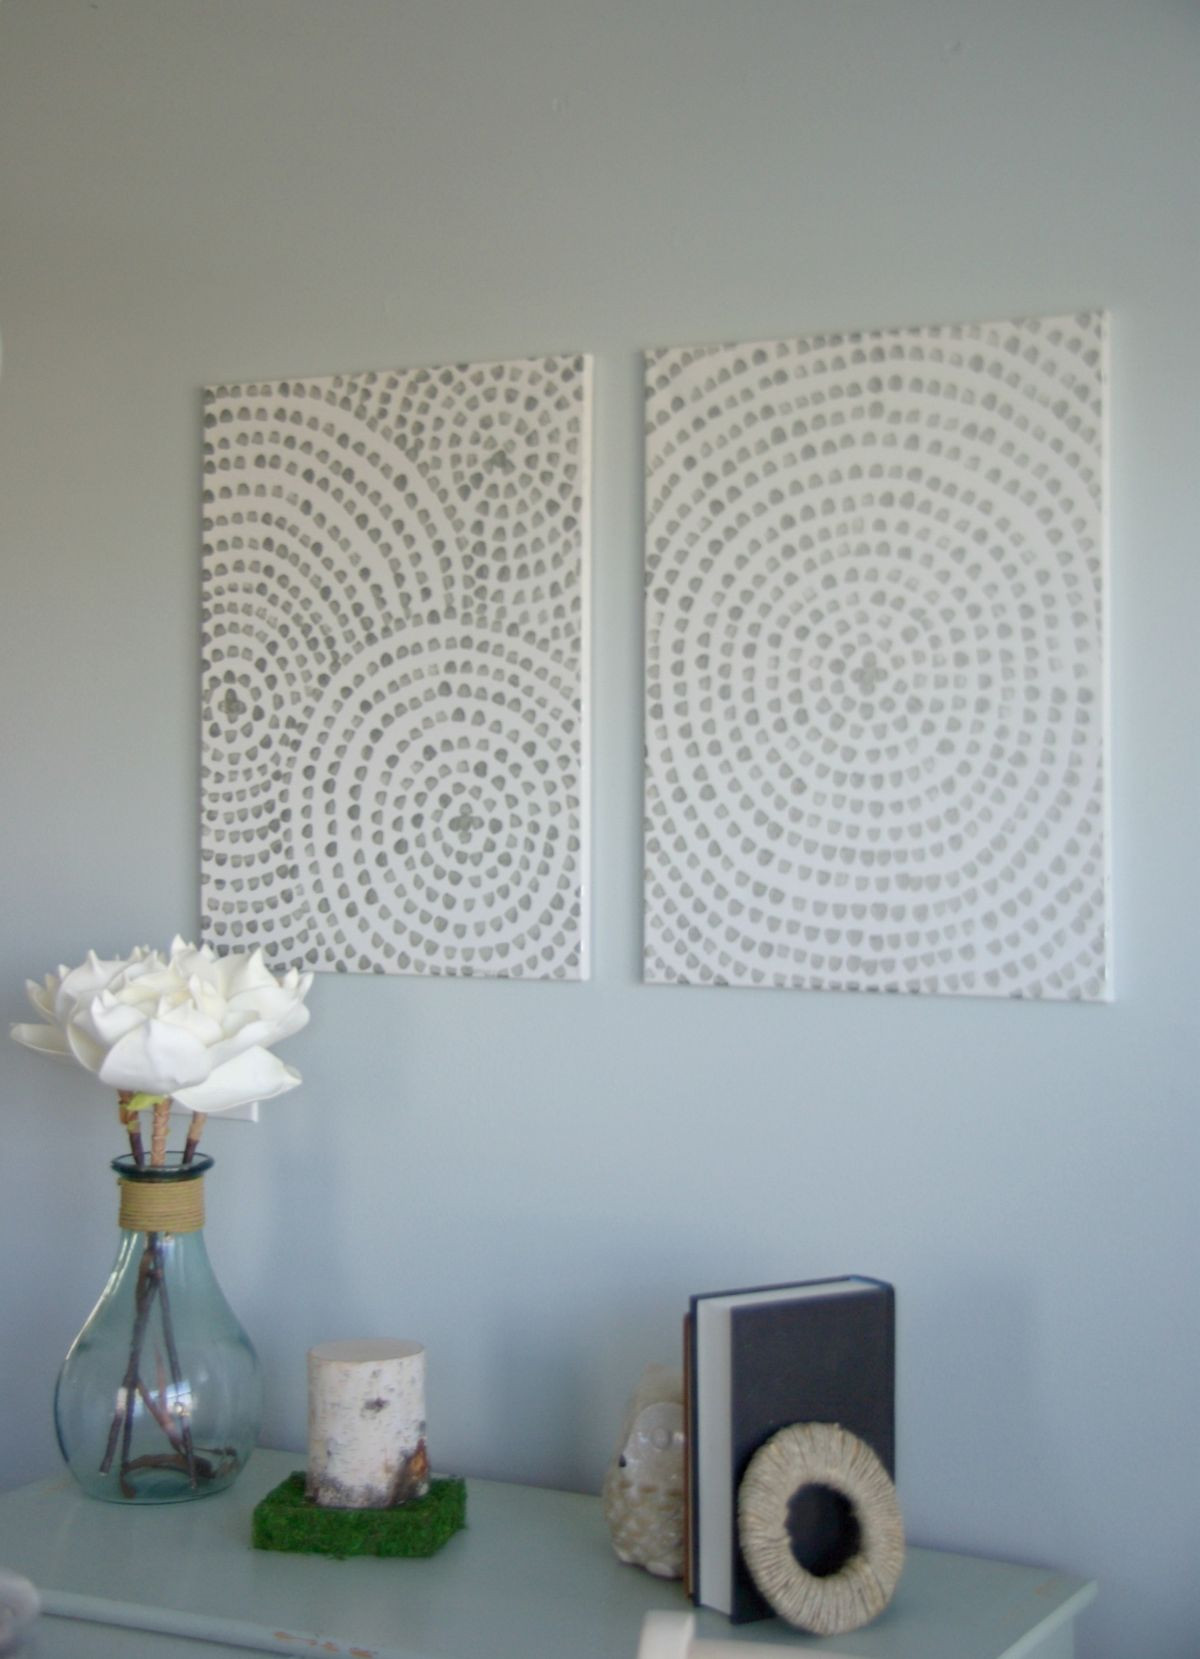 DIY Art Decor
 DIY Canvas Wall Art A Low Cost Way To Add Art To Your Home